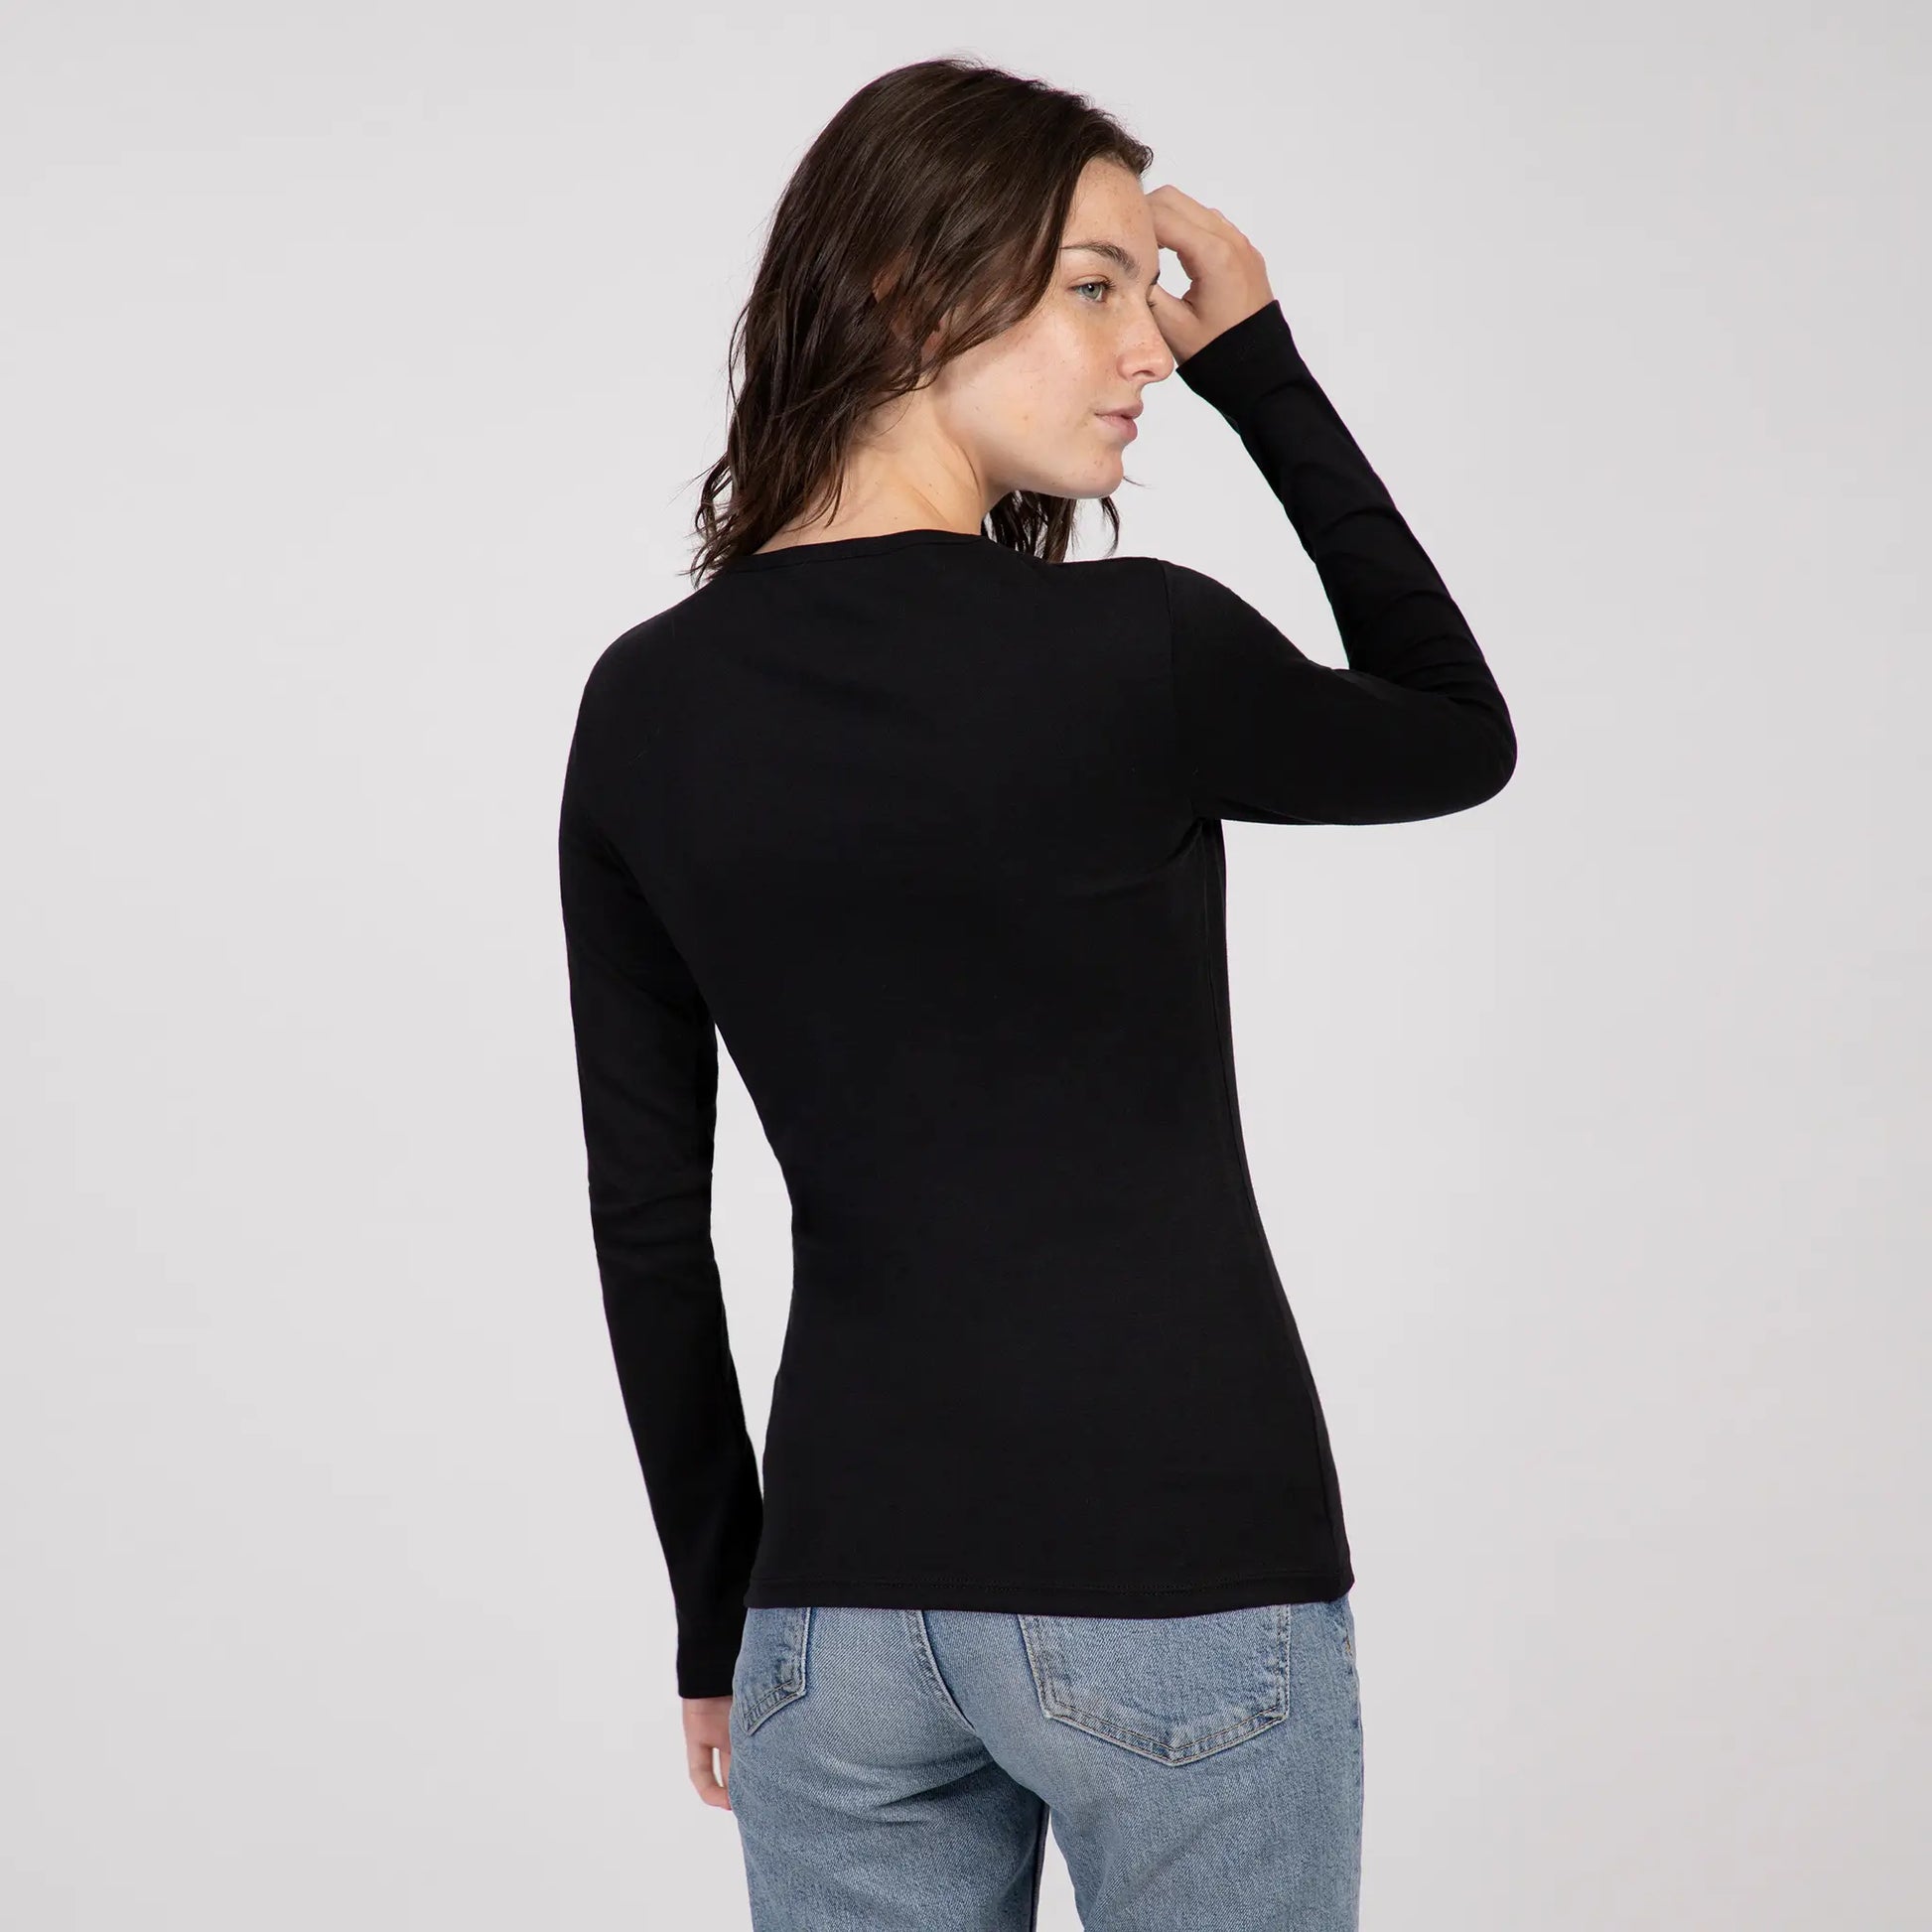 100% Cotton Long Sleeve Tier Top for Women - MADE IN USA